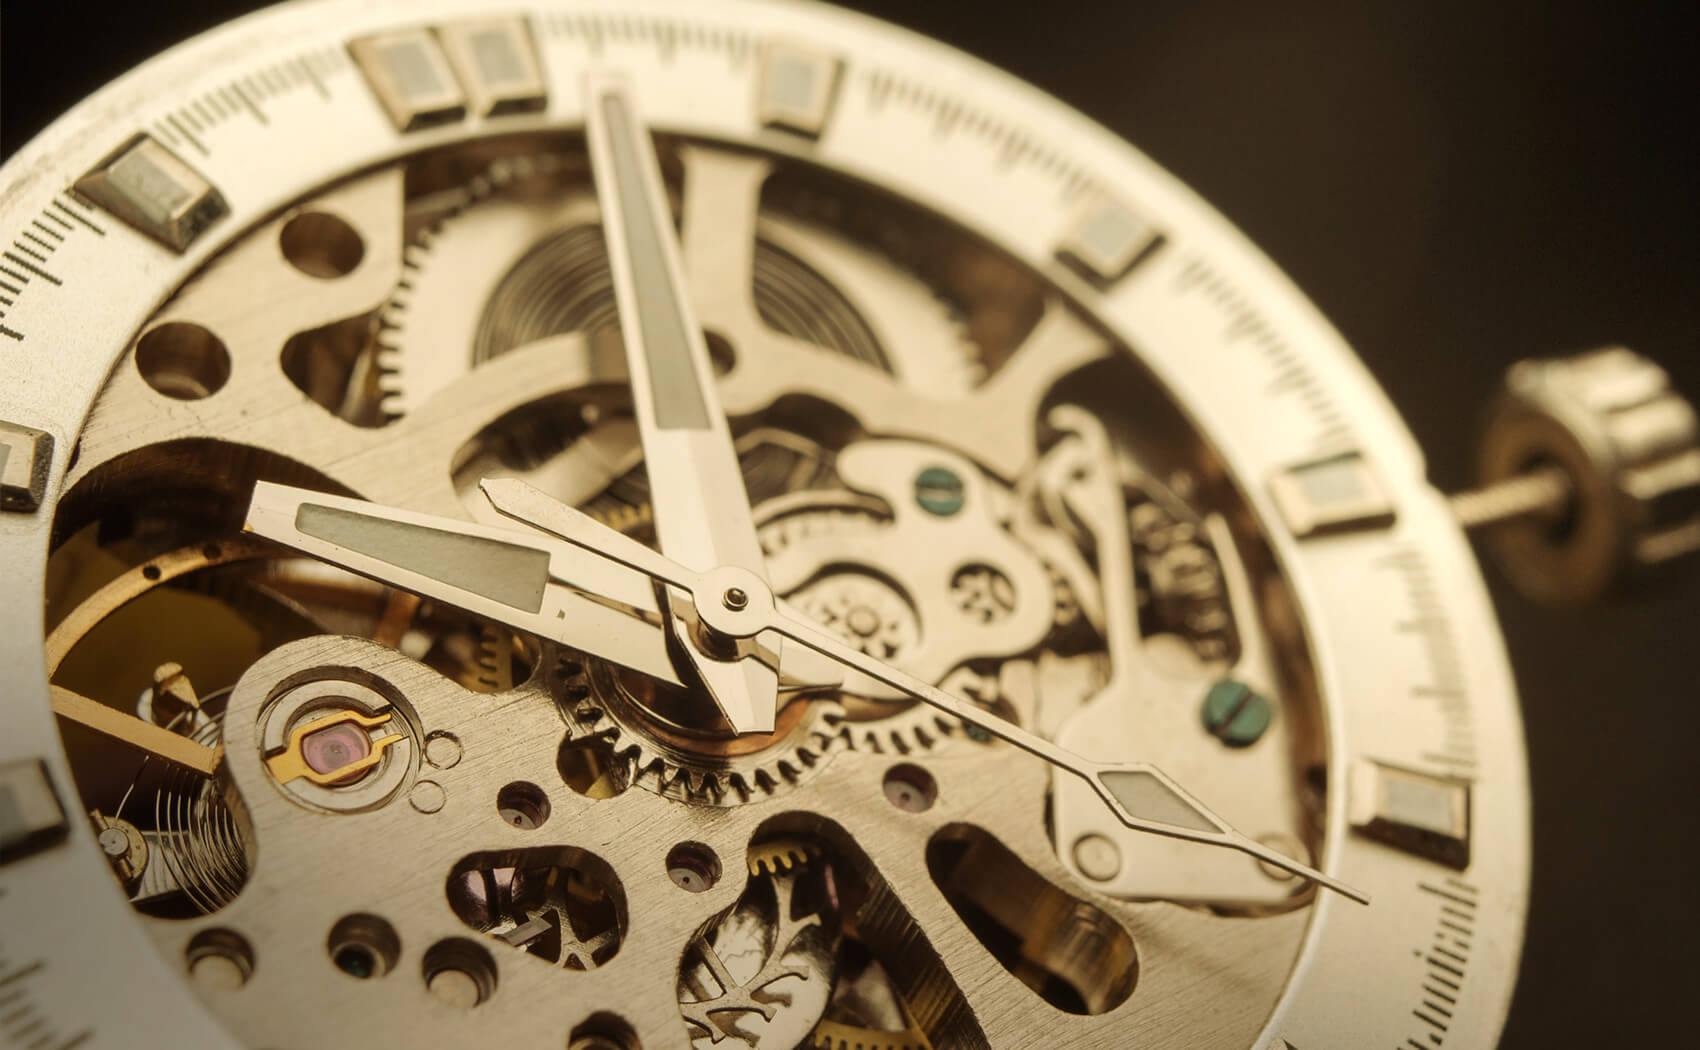 Image showcasing one of the types of watch movement mechanisms